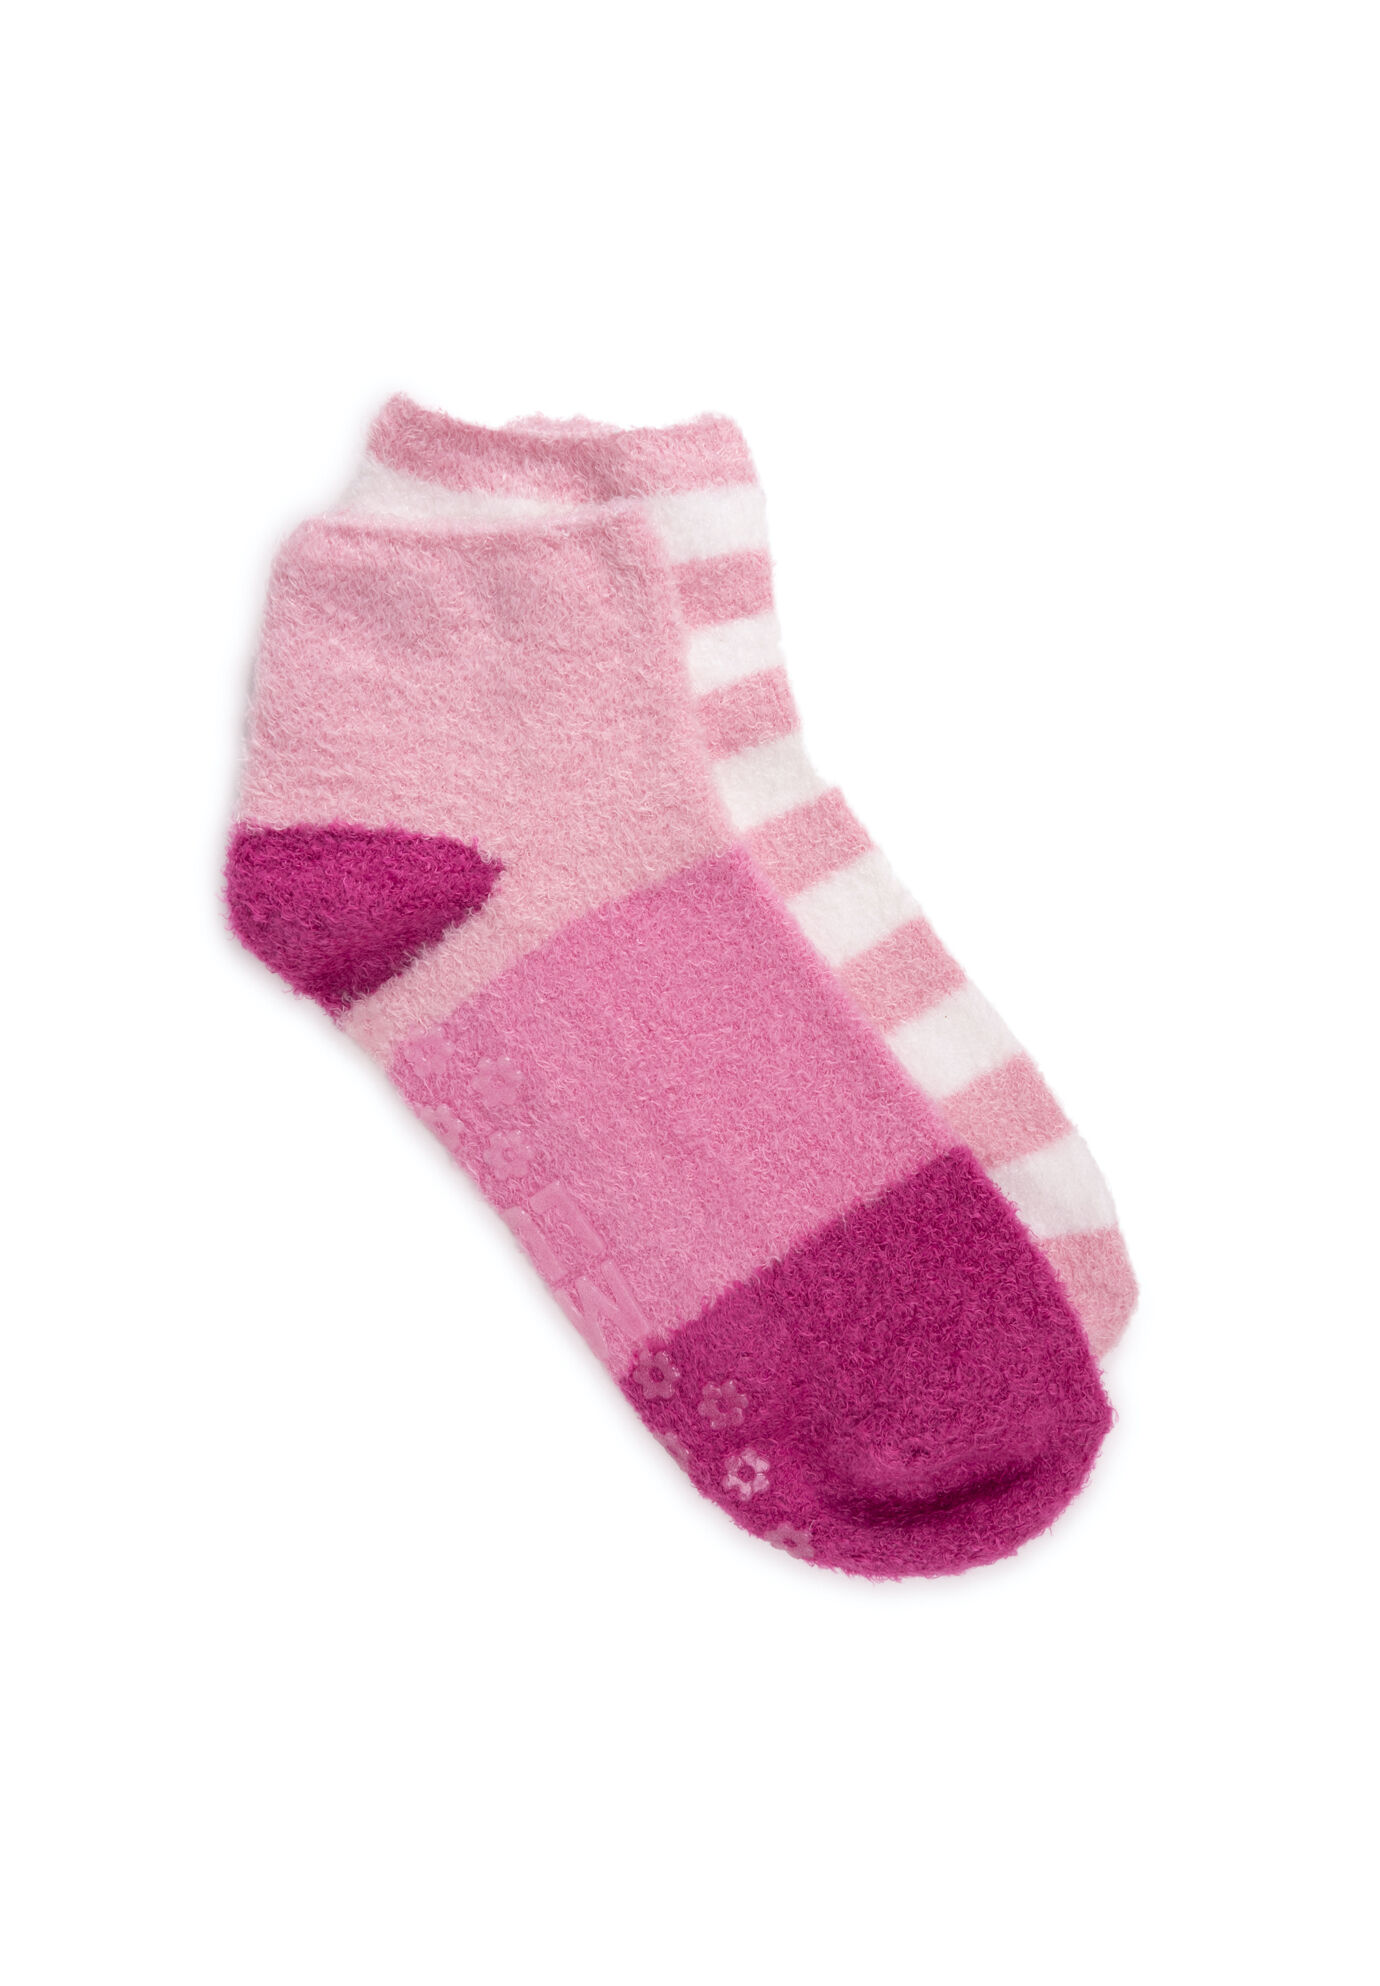 Women's 2 Pair Pack Aloe Infused Crew Socks by MUK LUKS in Pink (Size ONE)